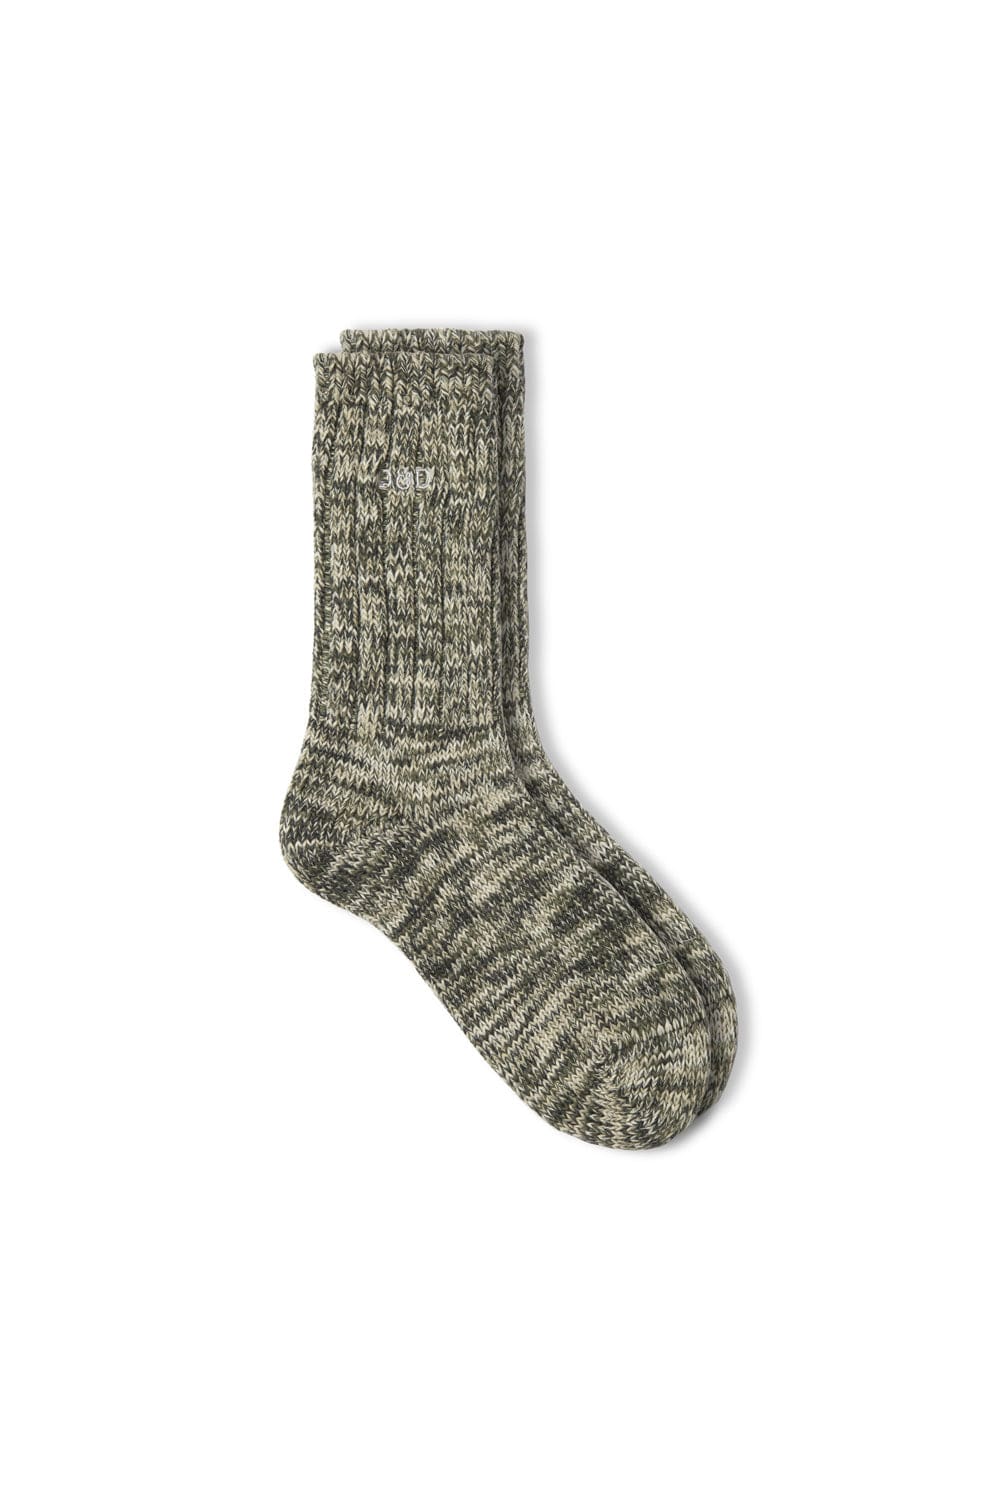 Desmond and Dempsey Mens and Womens Socks